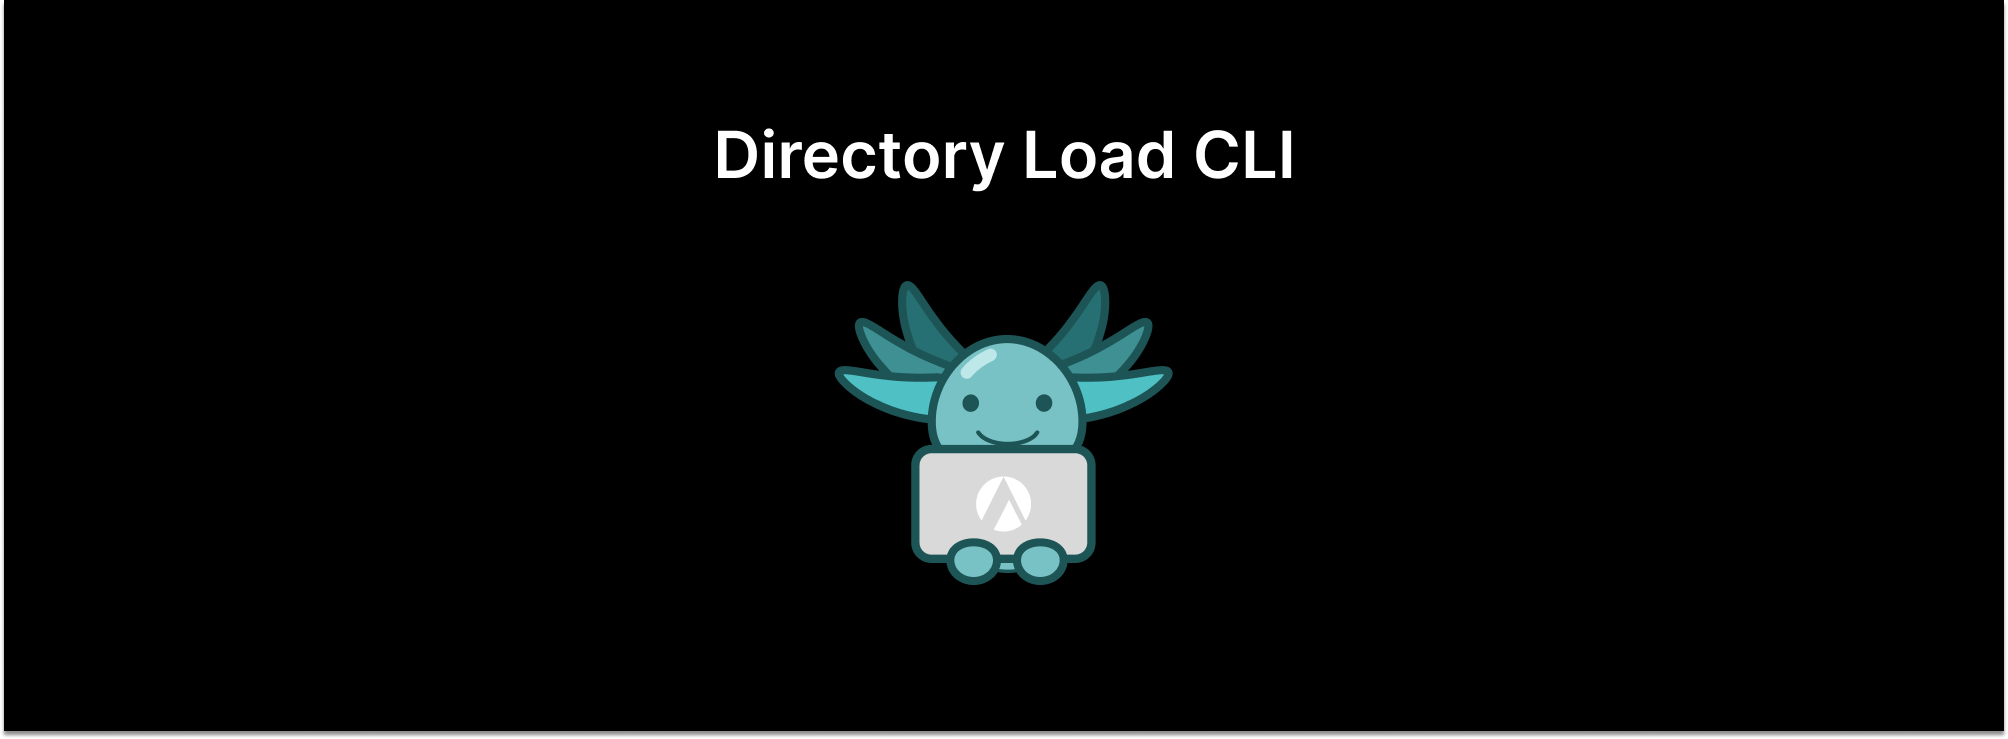 Introducing Aserto Directory Load CLI